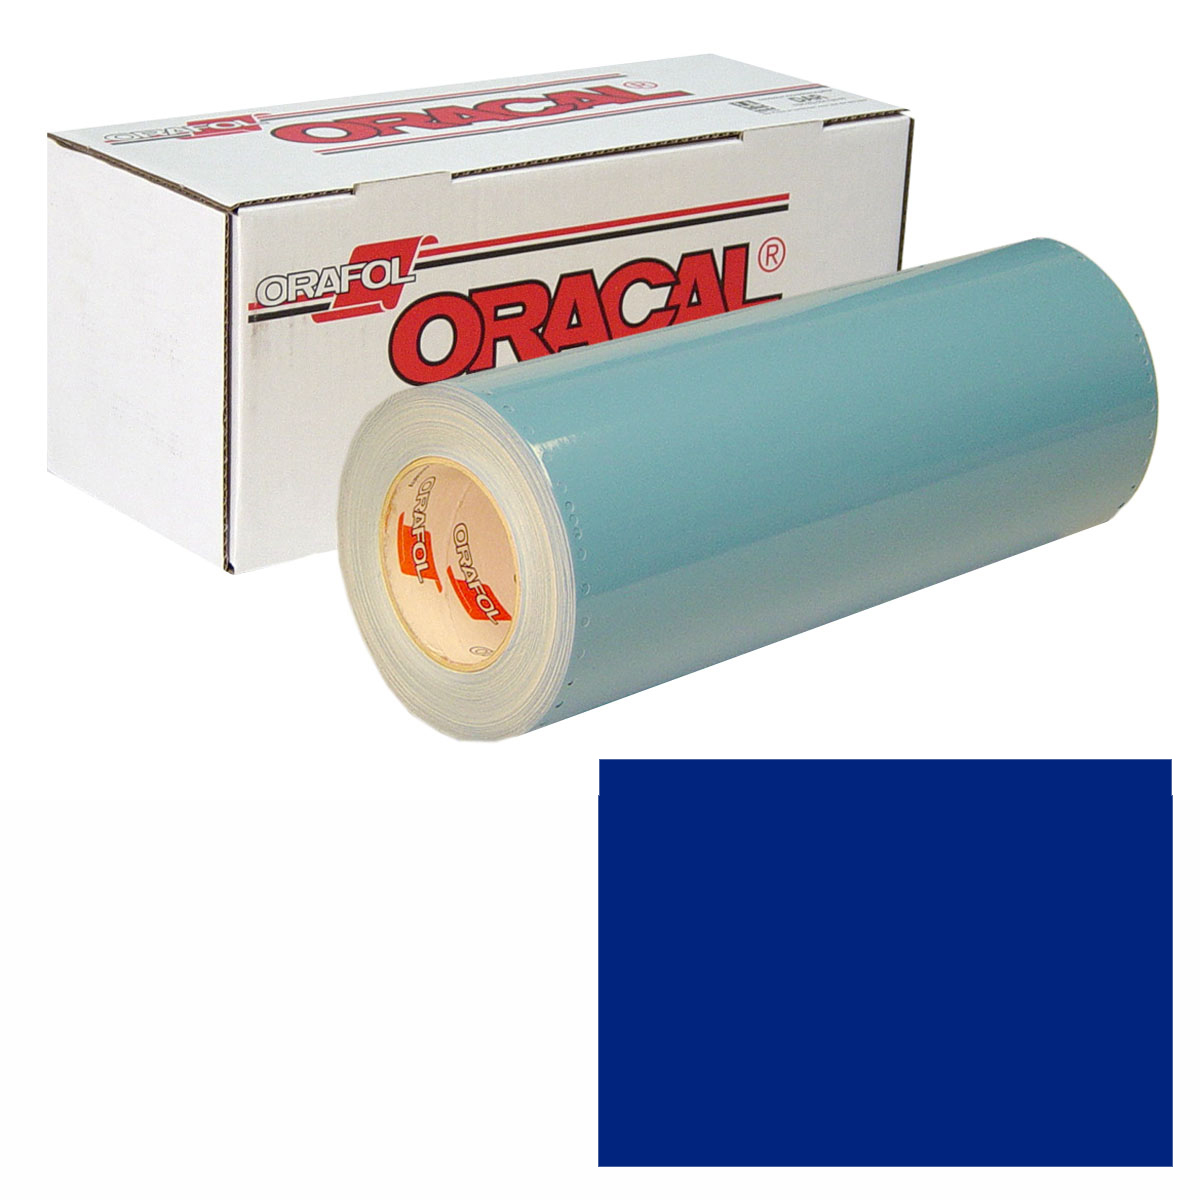 ORACAL 751 30in X 10yd 536 Middle Blue